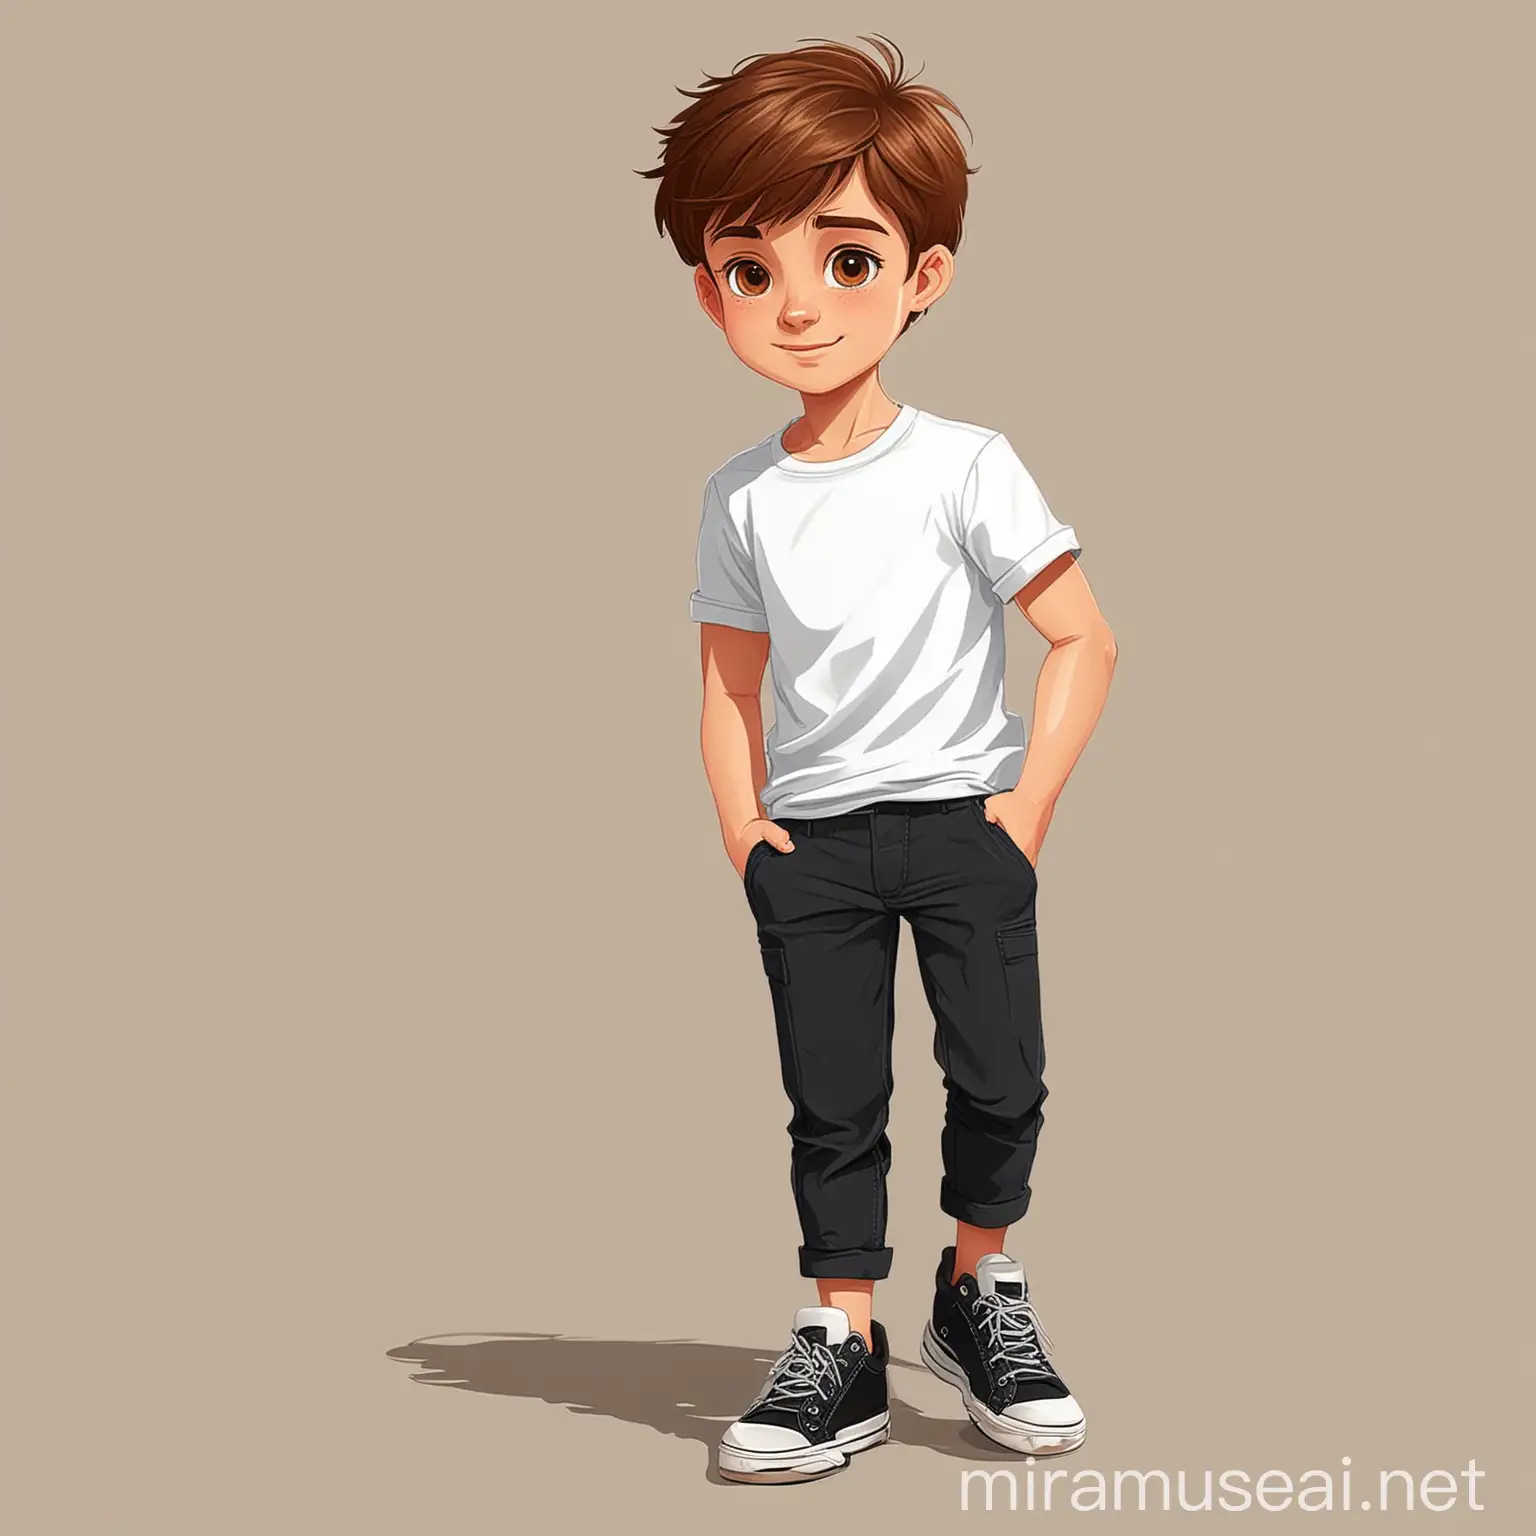 Draw a young boy with brown hair who wears a white shirt, black pants, and sneakers in a vector flat style